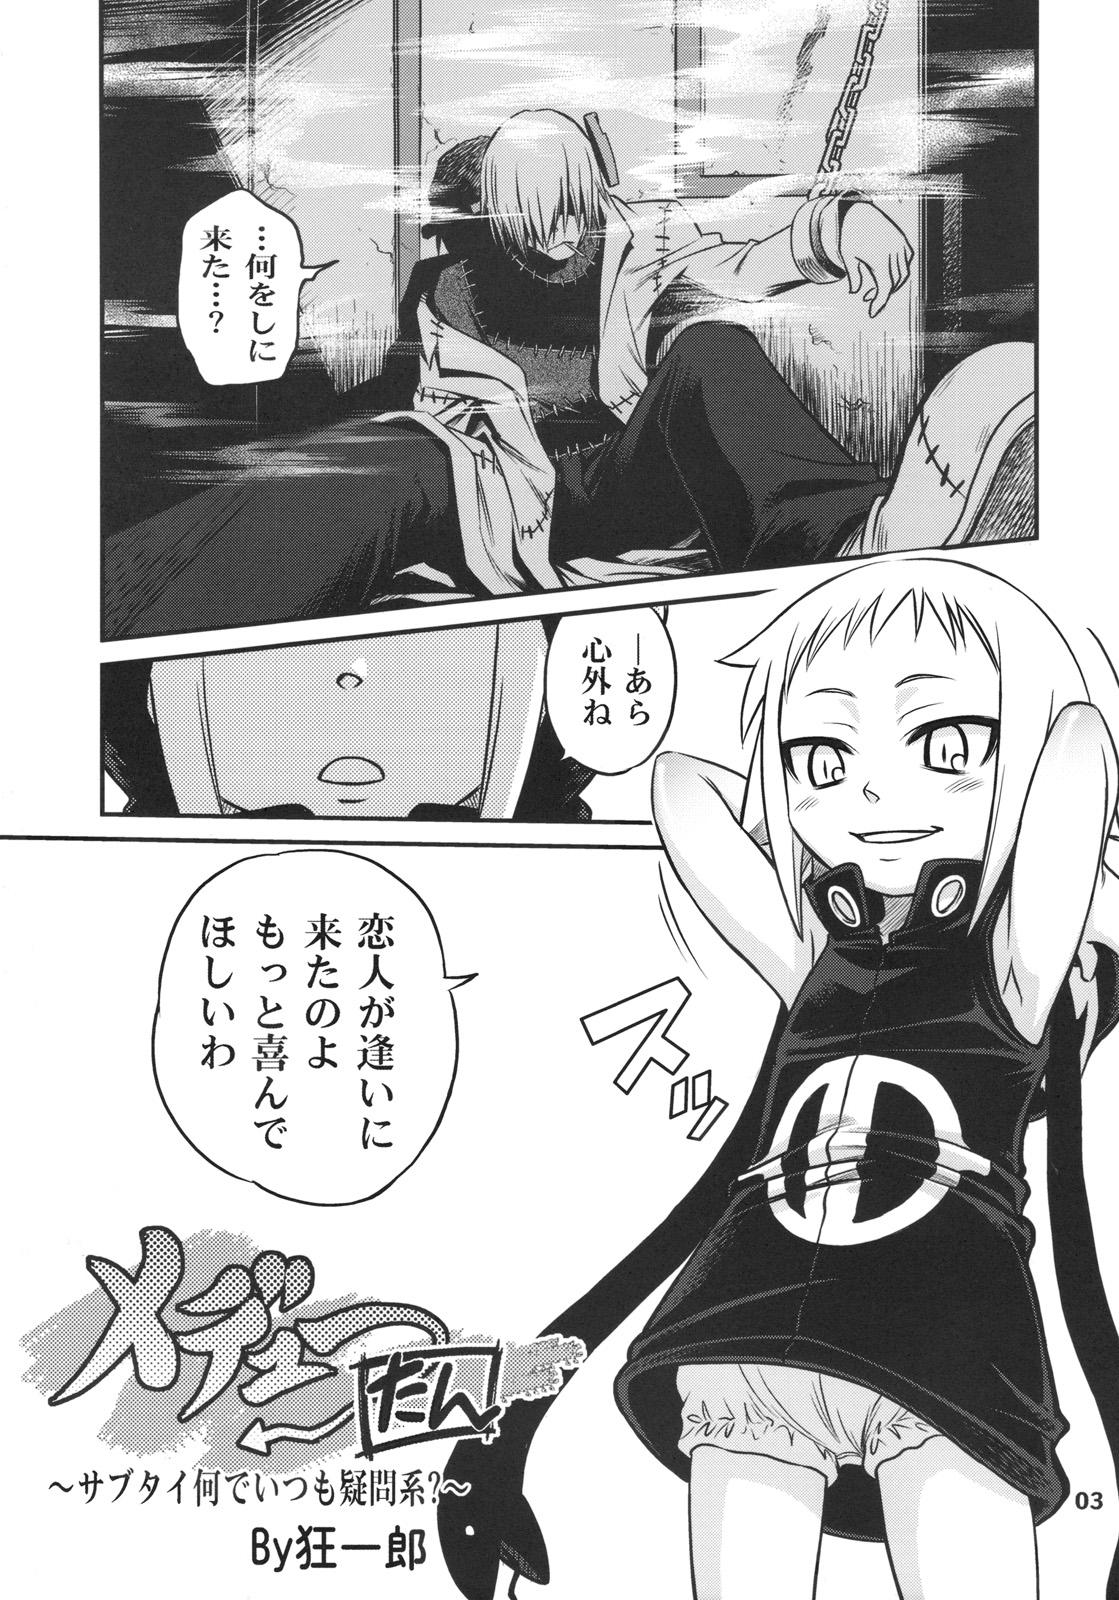 Cougar Medhu-tan - Soul eater Family - Page 2